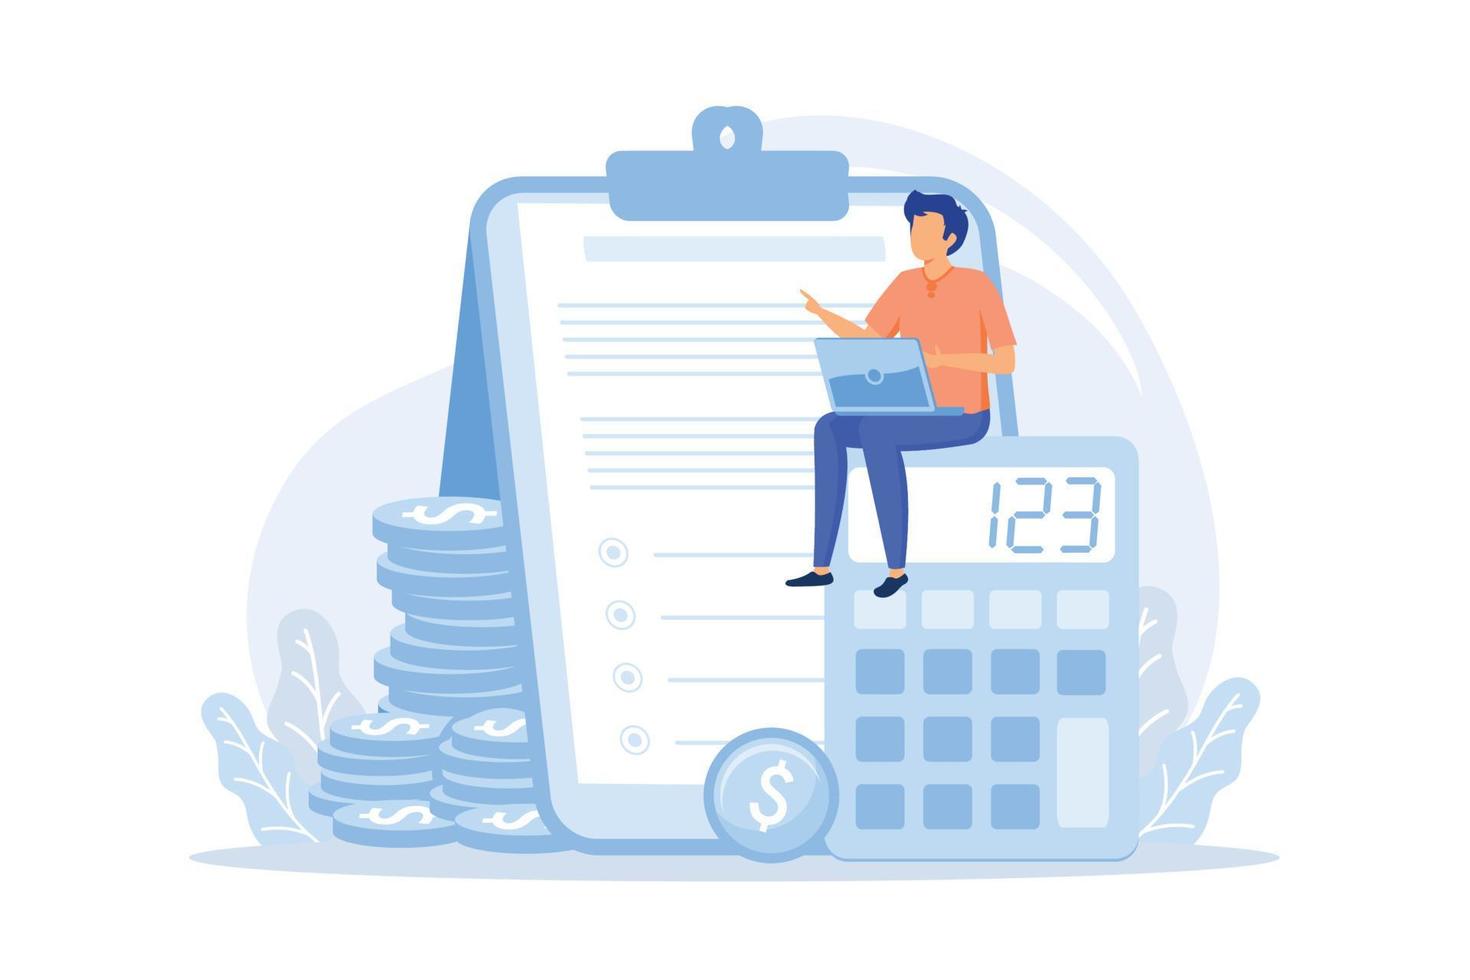 Net income calculating Salary calculation, net income formula, take home pay, corporate accounting, calculating earnings, profit estimation flat design modern illustration vector